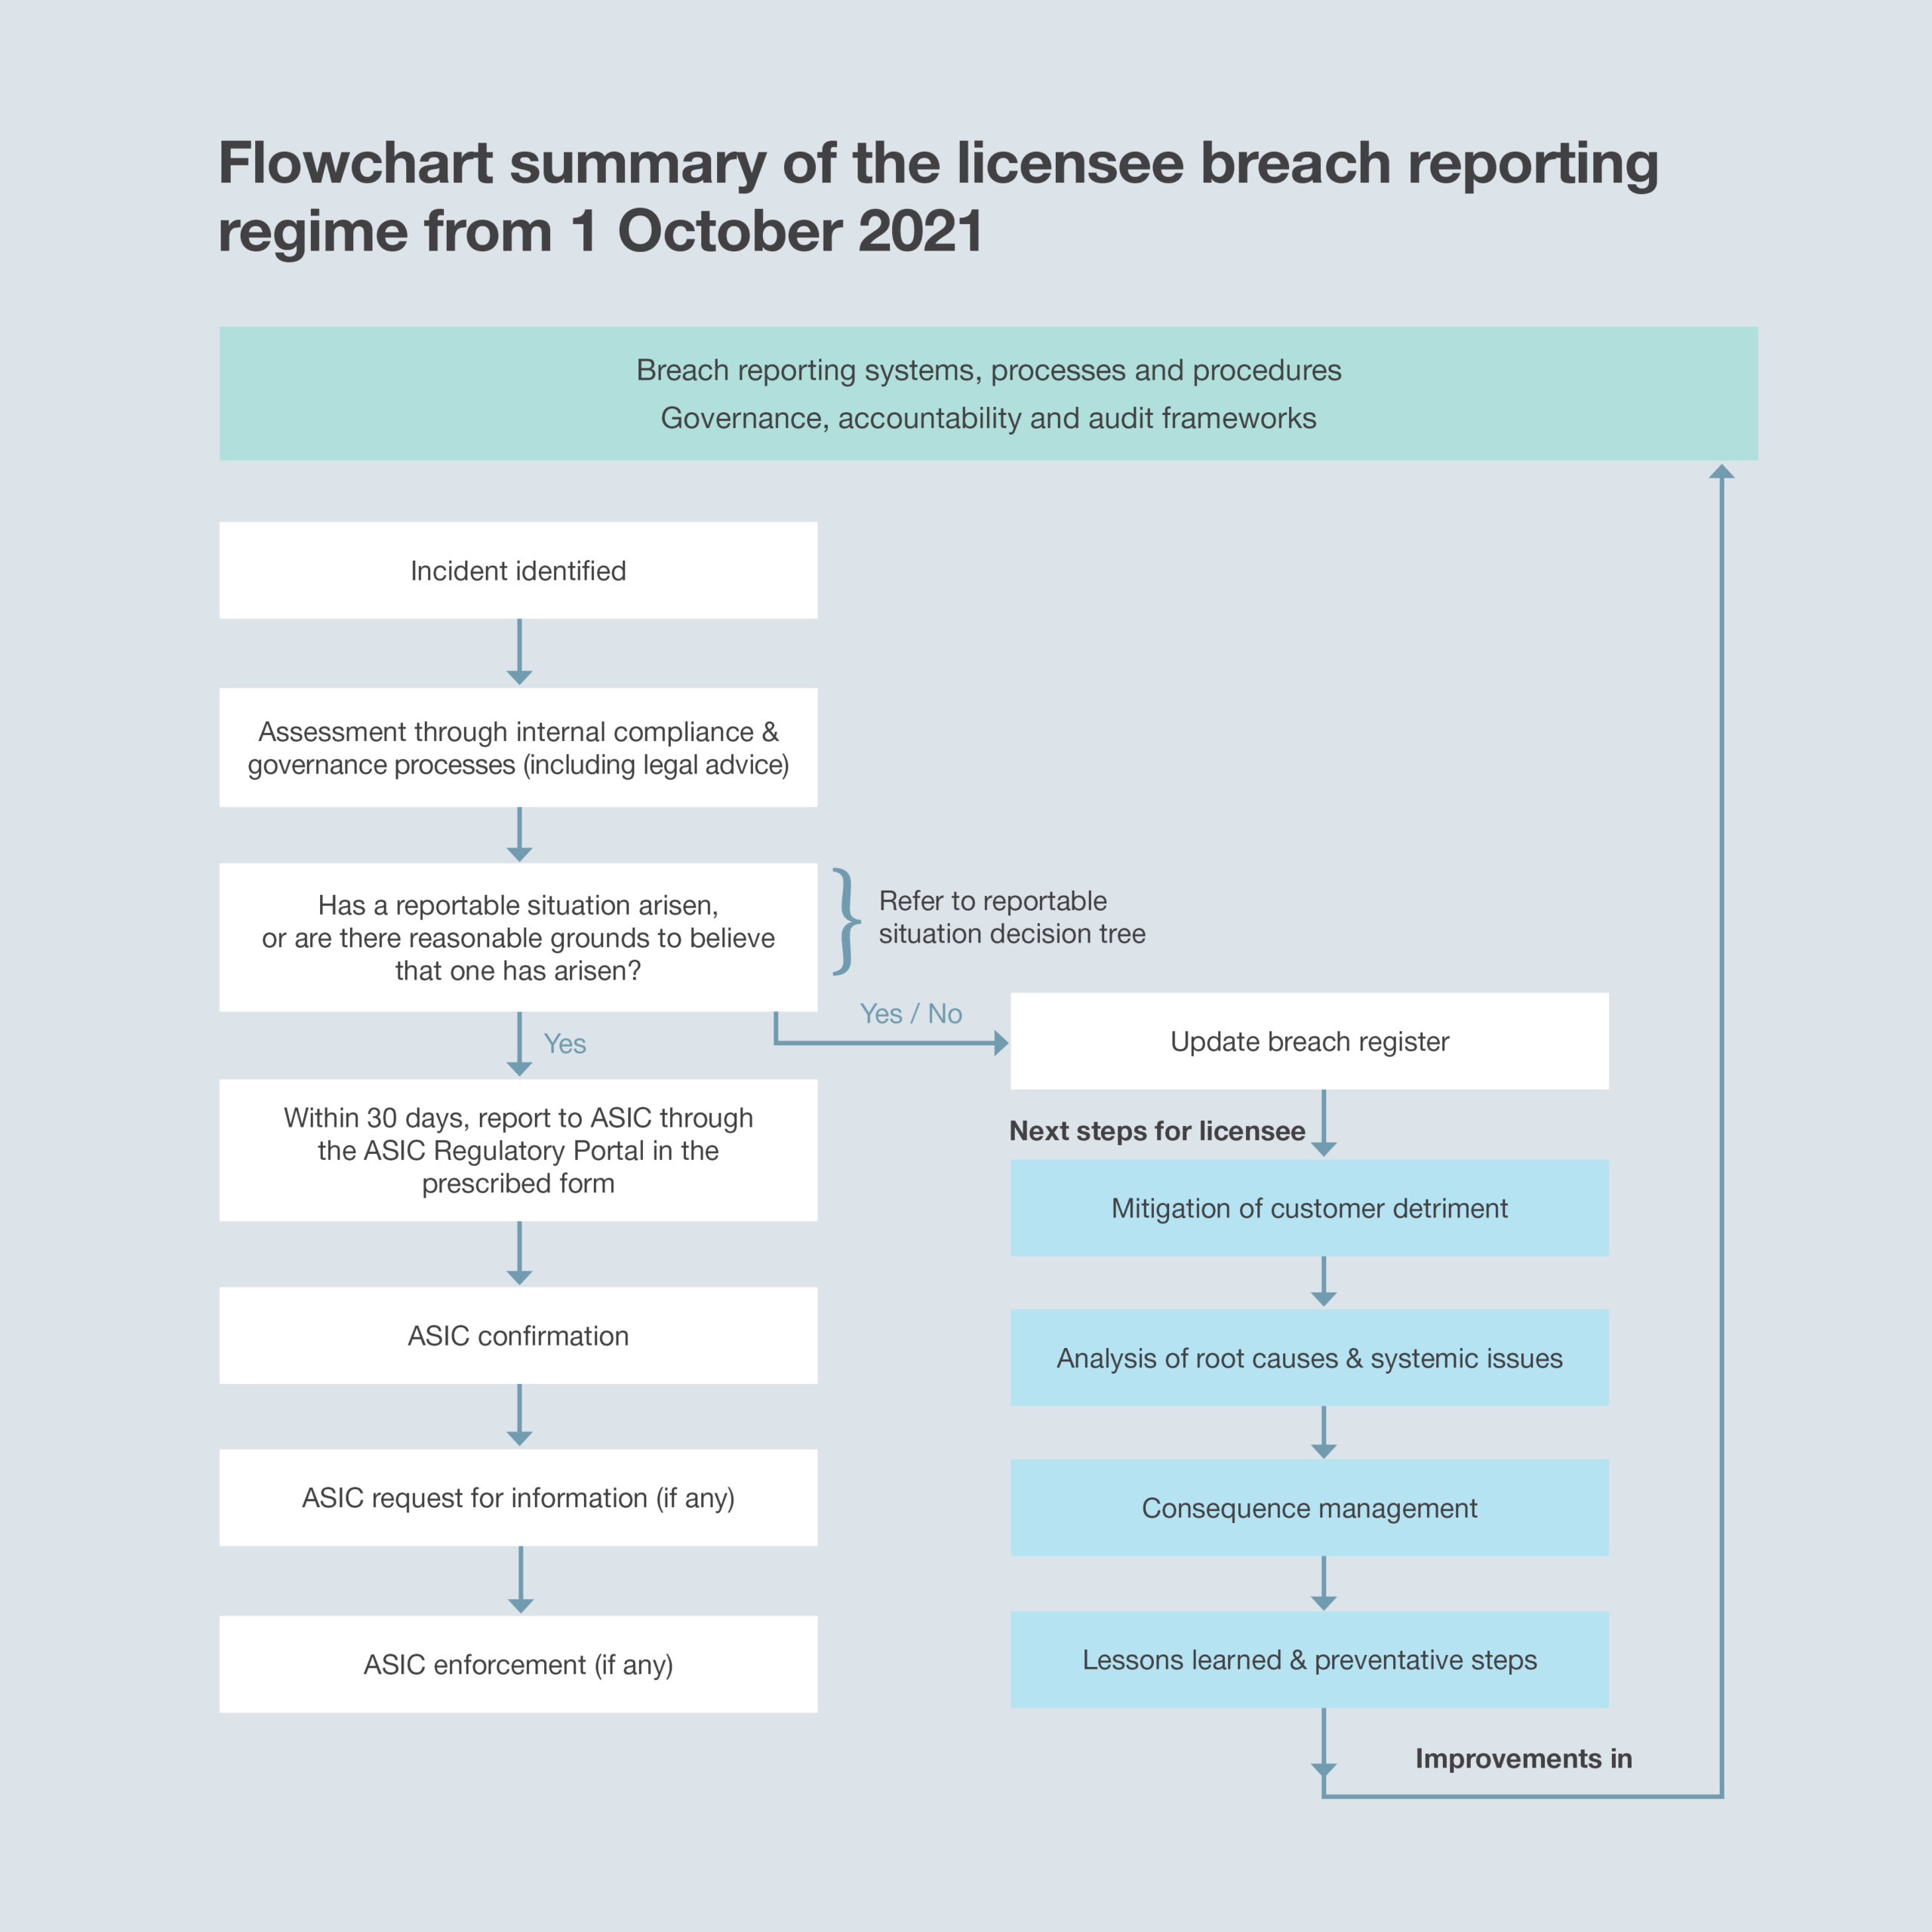 Flowchart summary of the licence breach reporting regime from 1 October 2021